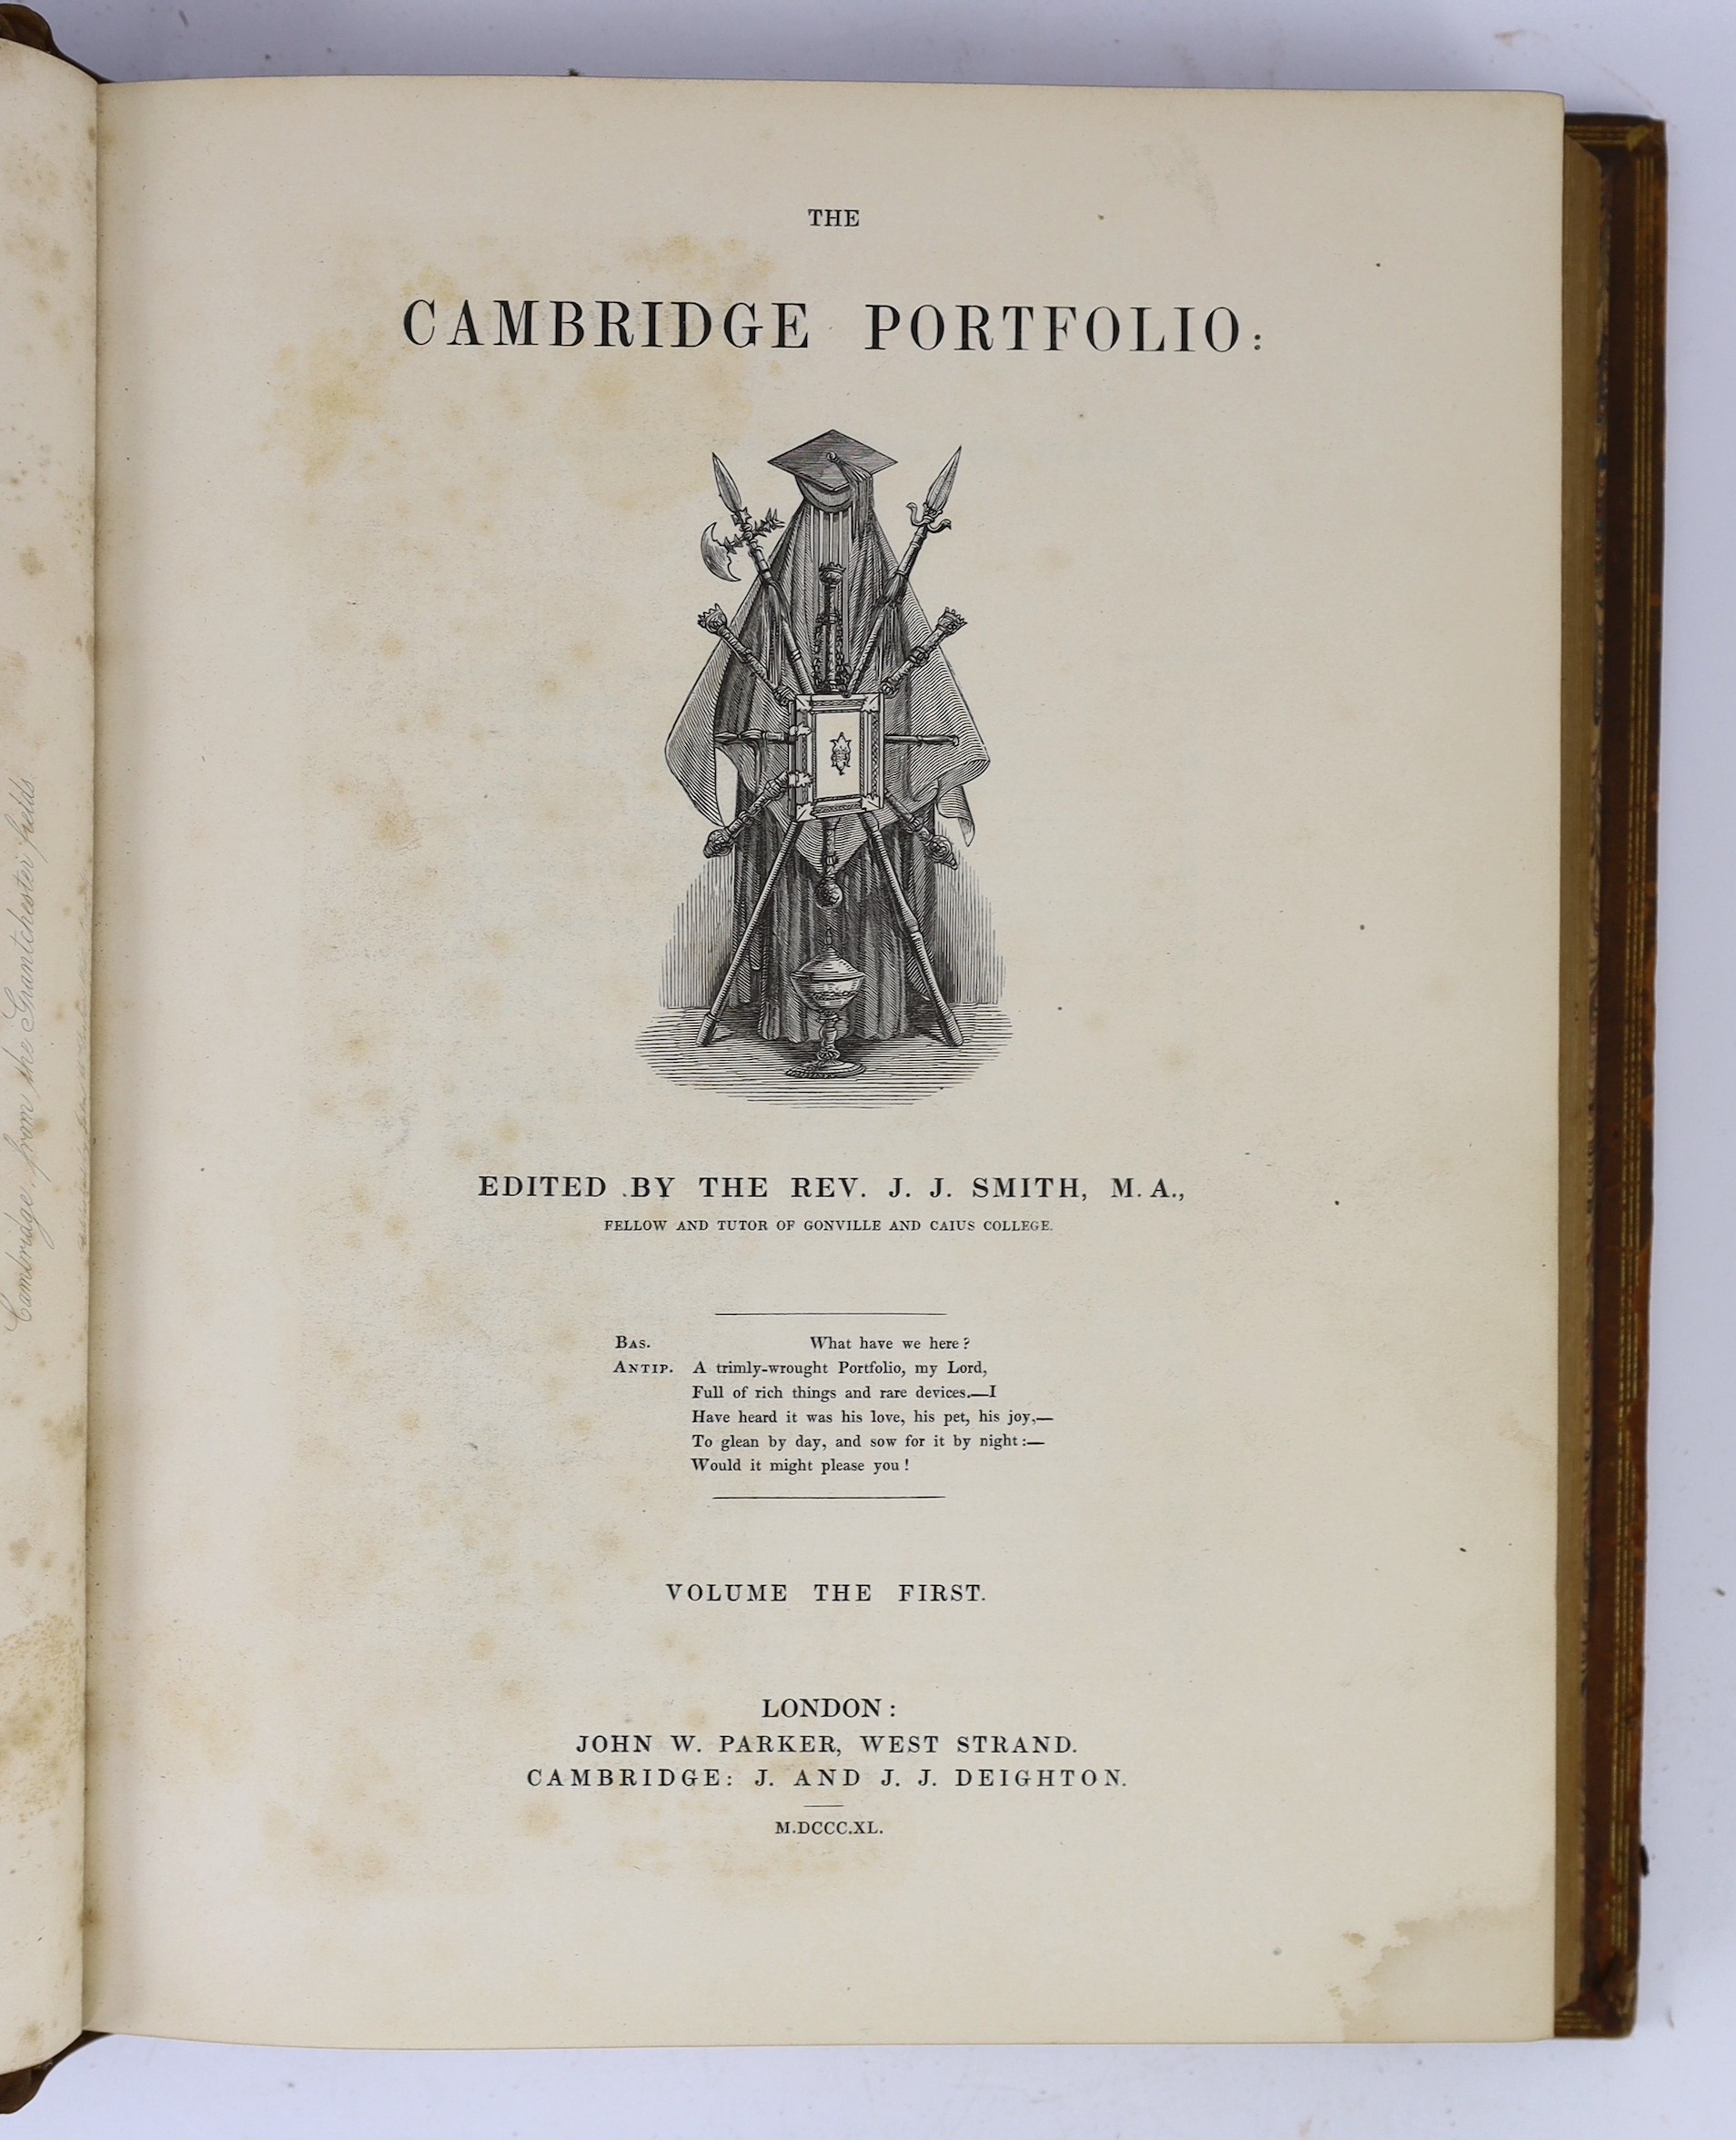 CAMBS: Smith, Rev. J.J., editor - The Cambridge Portfolio. 2 vols. pictorial title vignettes, 78 plates (2 tinted) and num. text engravings; gilt-ruled and decorated russia, ge. and marbled e/ps., roy.4to. London & Cambr